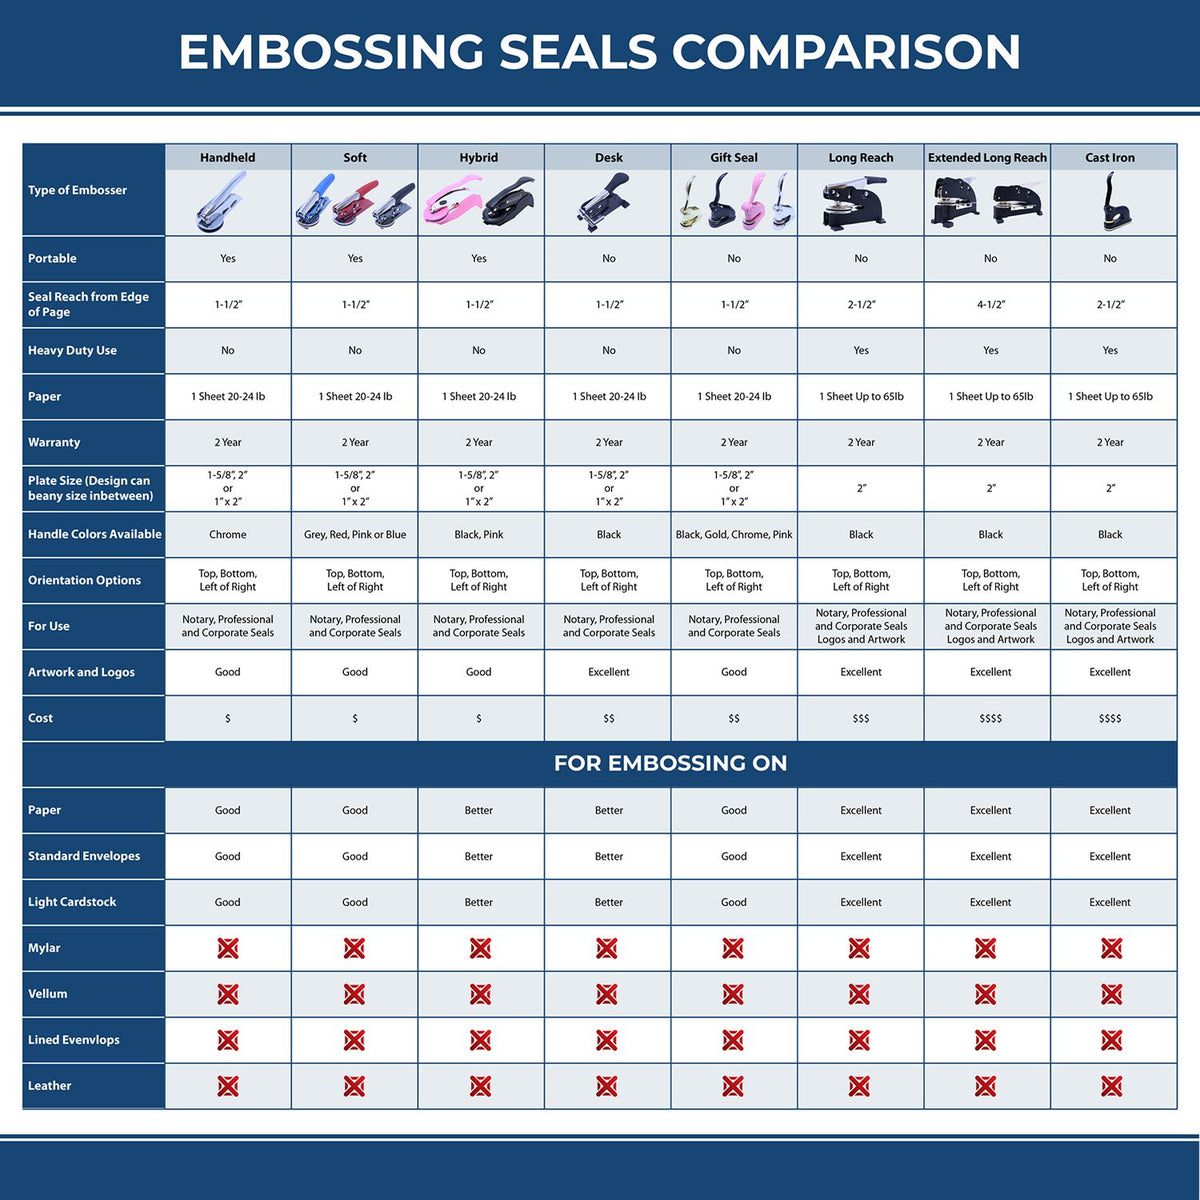 A comparison chart for the different types of mount models available for the Heavy Duty Cast Iron Kentucky Geologist Seal Embosser